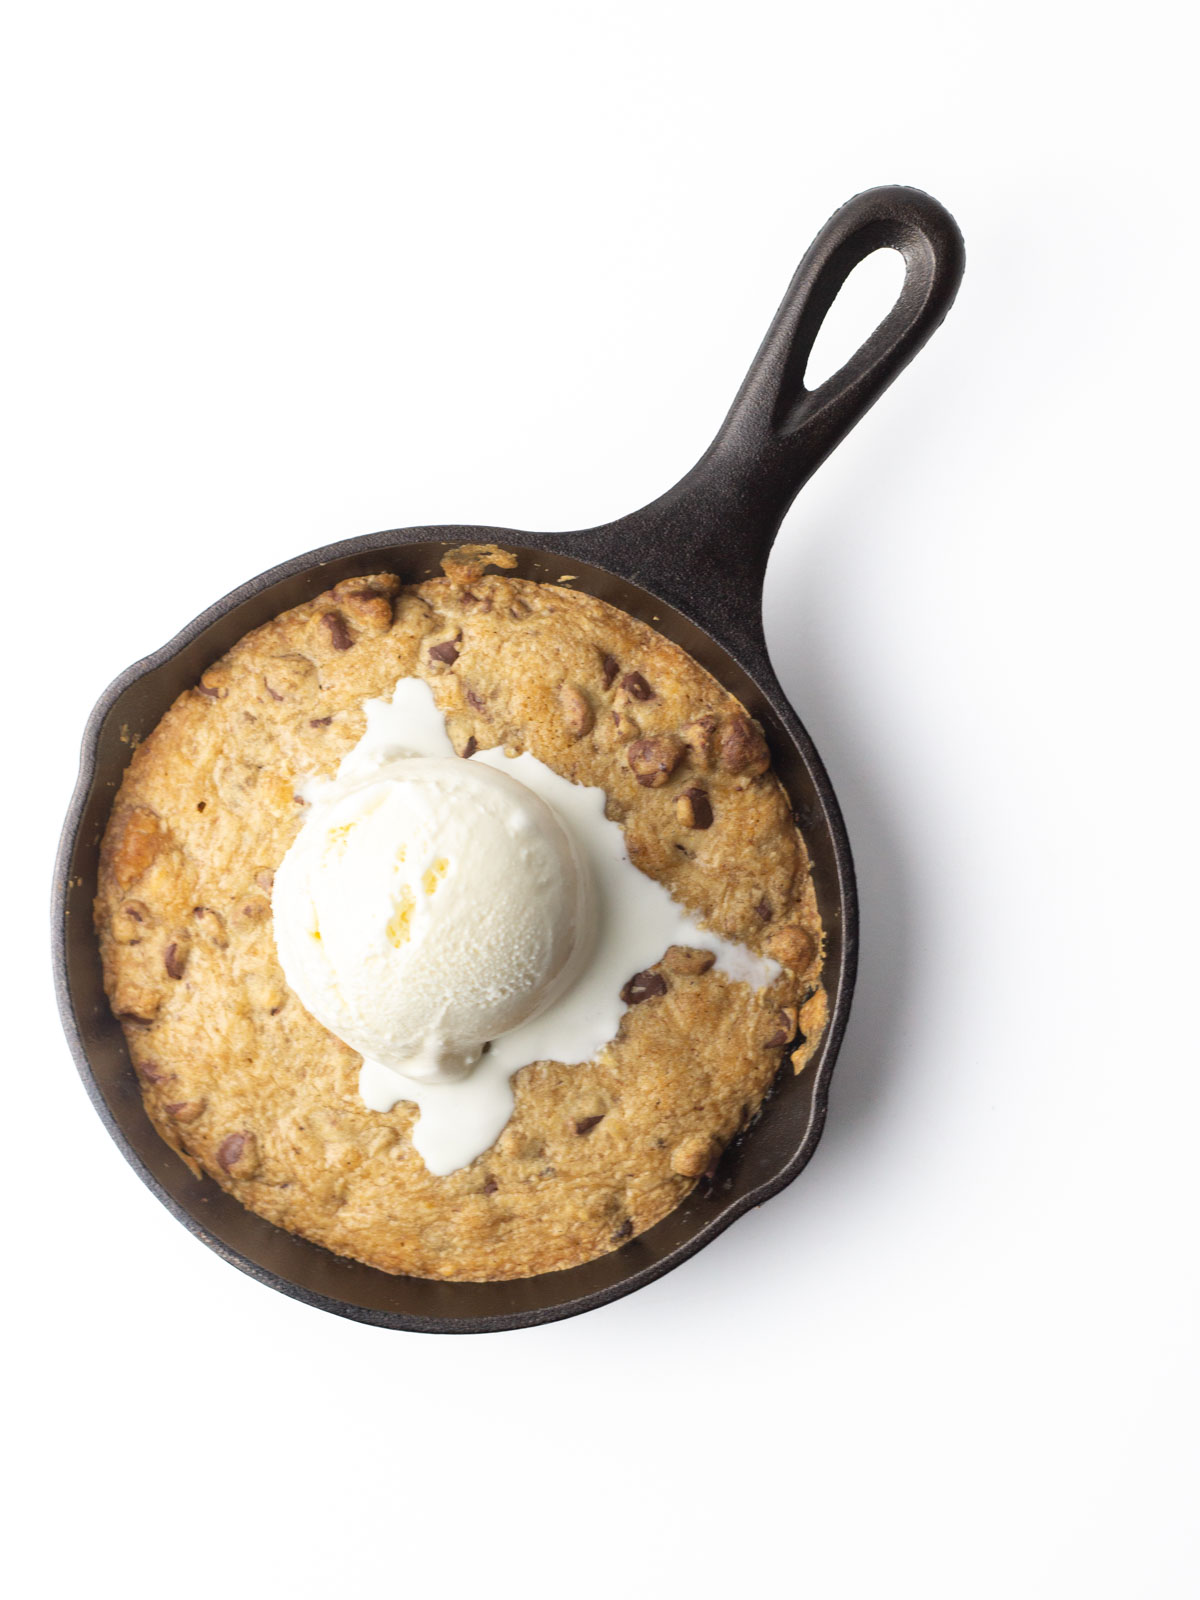 Chocolate chip cookie baked into a 6.5" cast iron skillet with a melting scoop of vanilla ice cream on top.